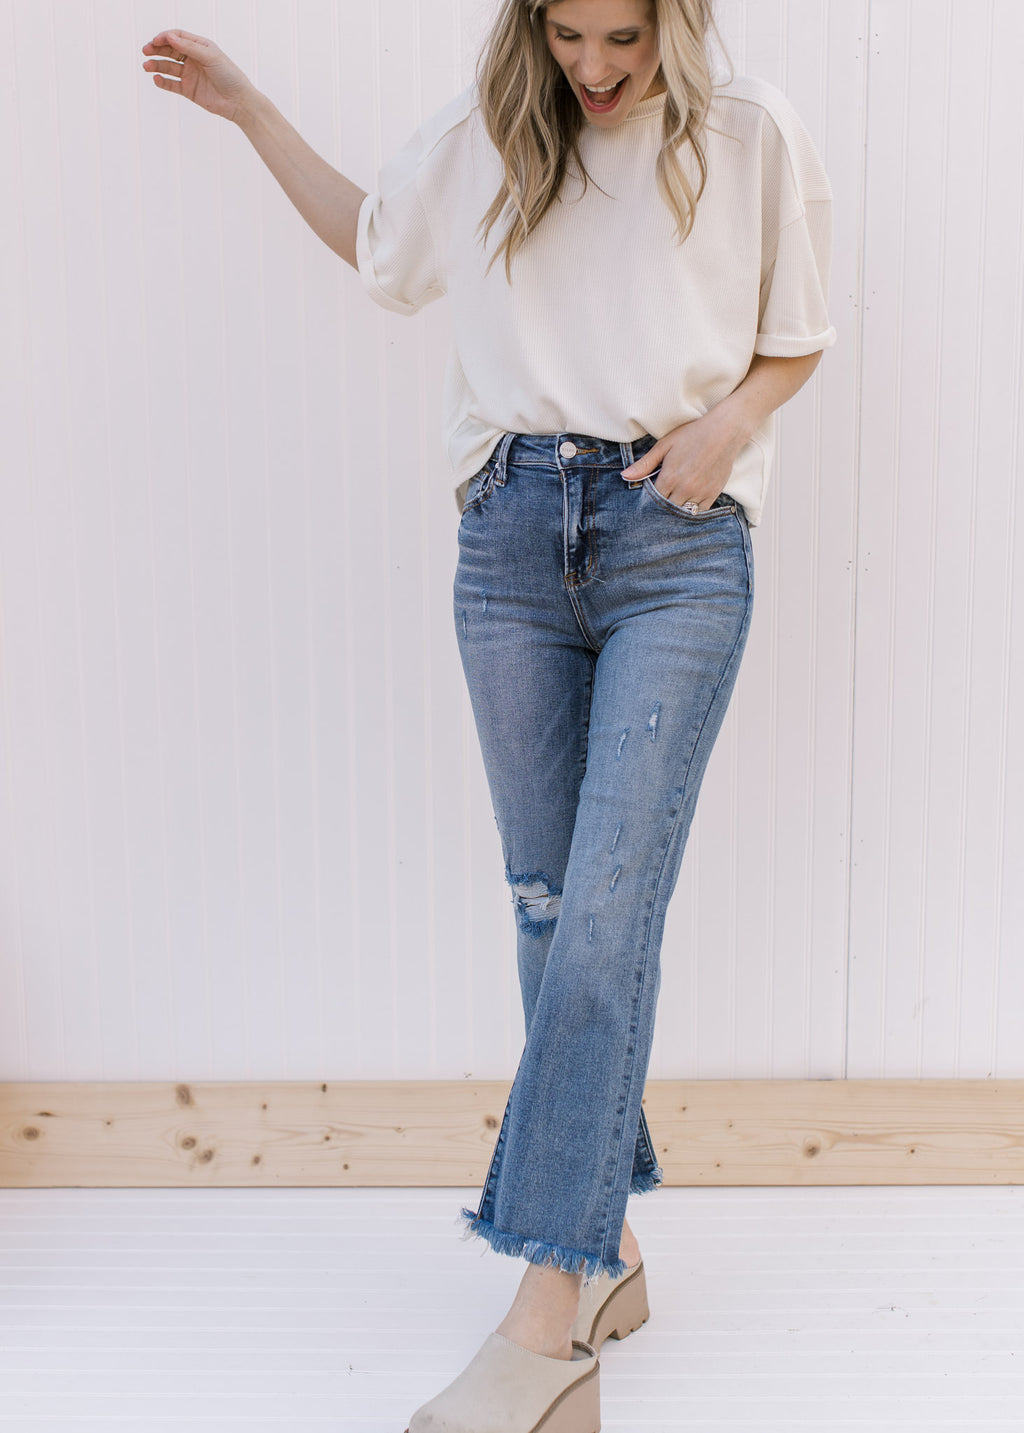 Model wearing distressed medium wash flare jeans with a cropped fit and raw hemline.